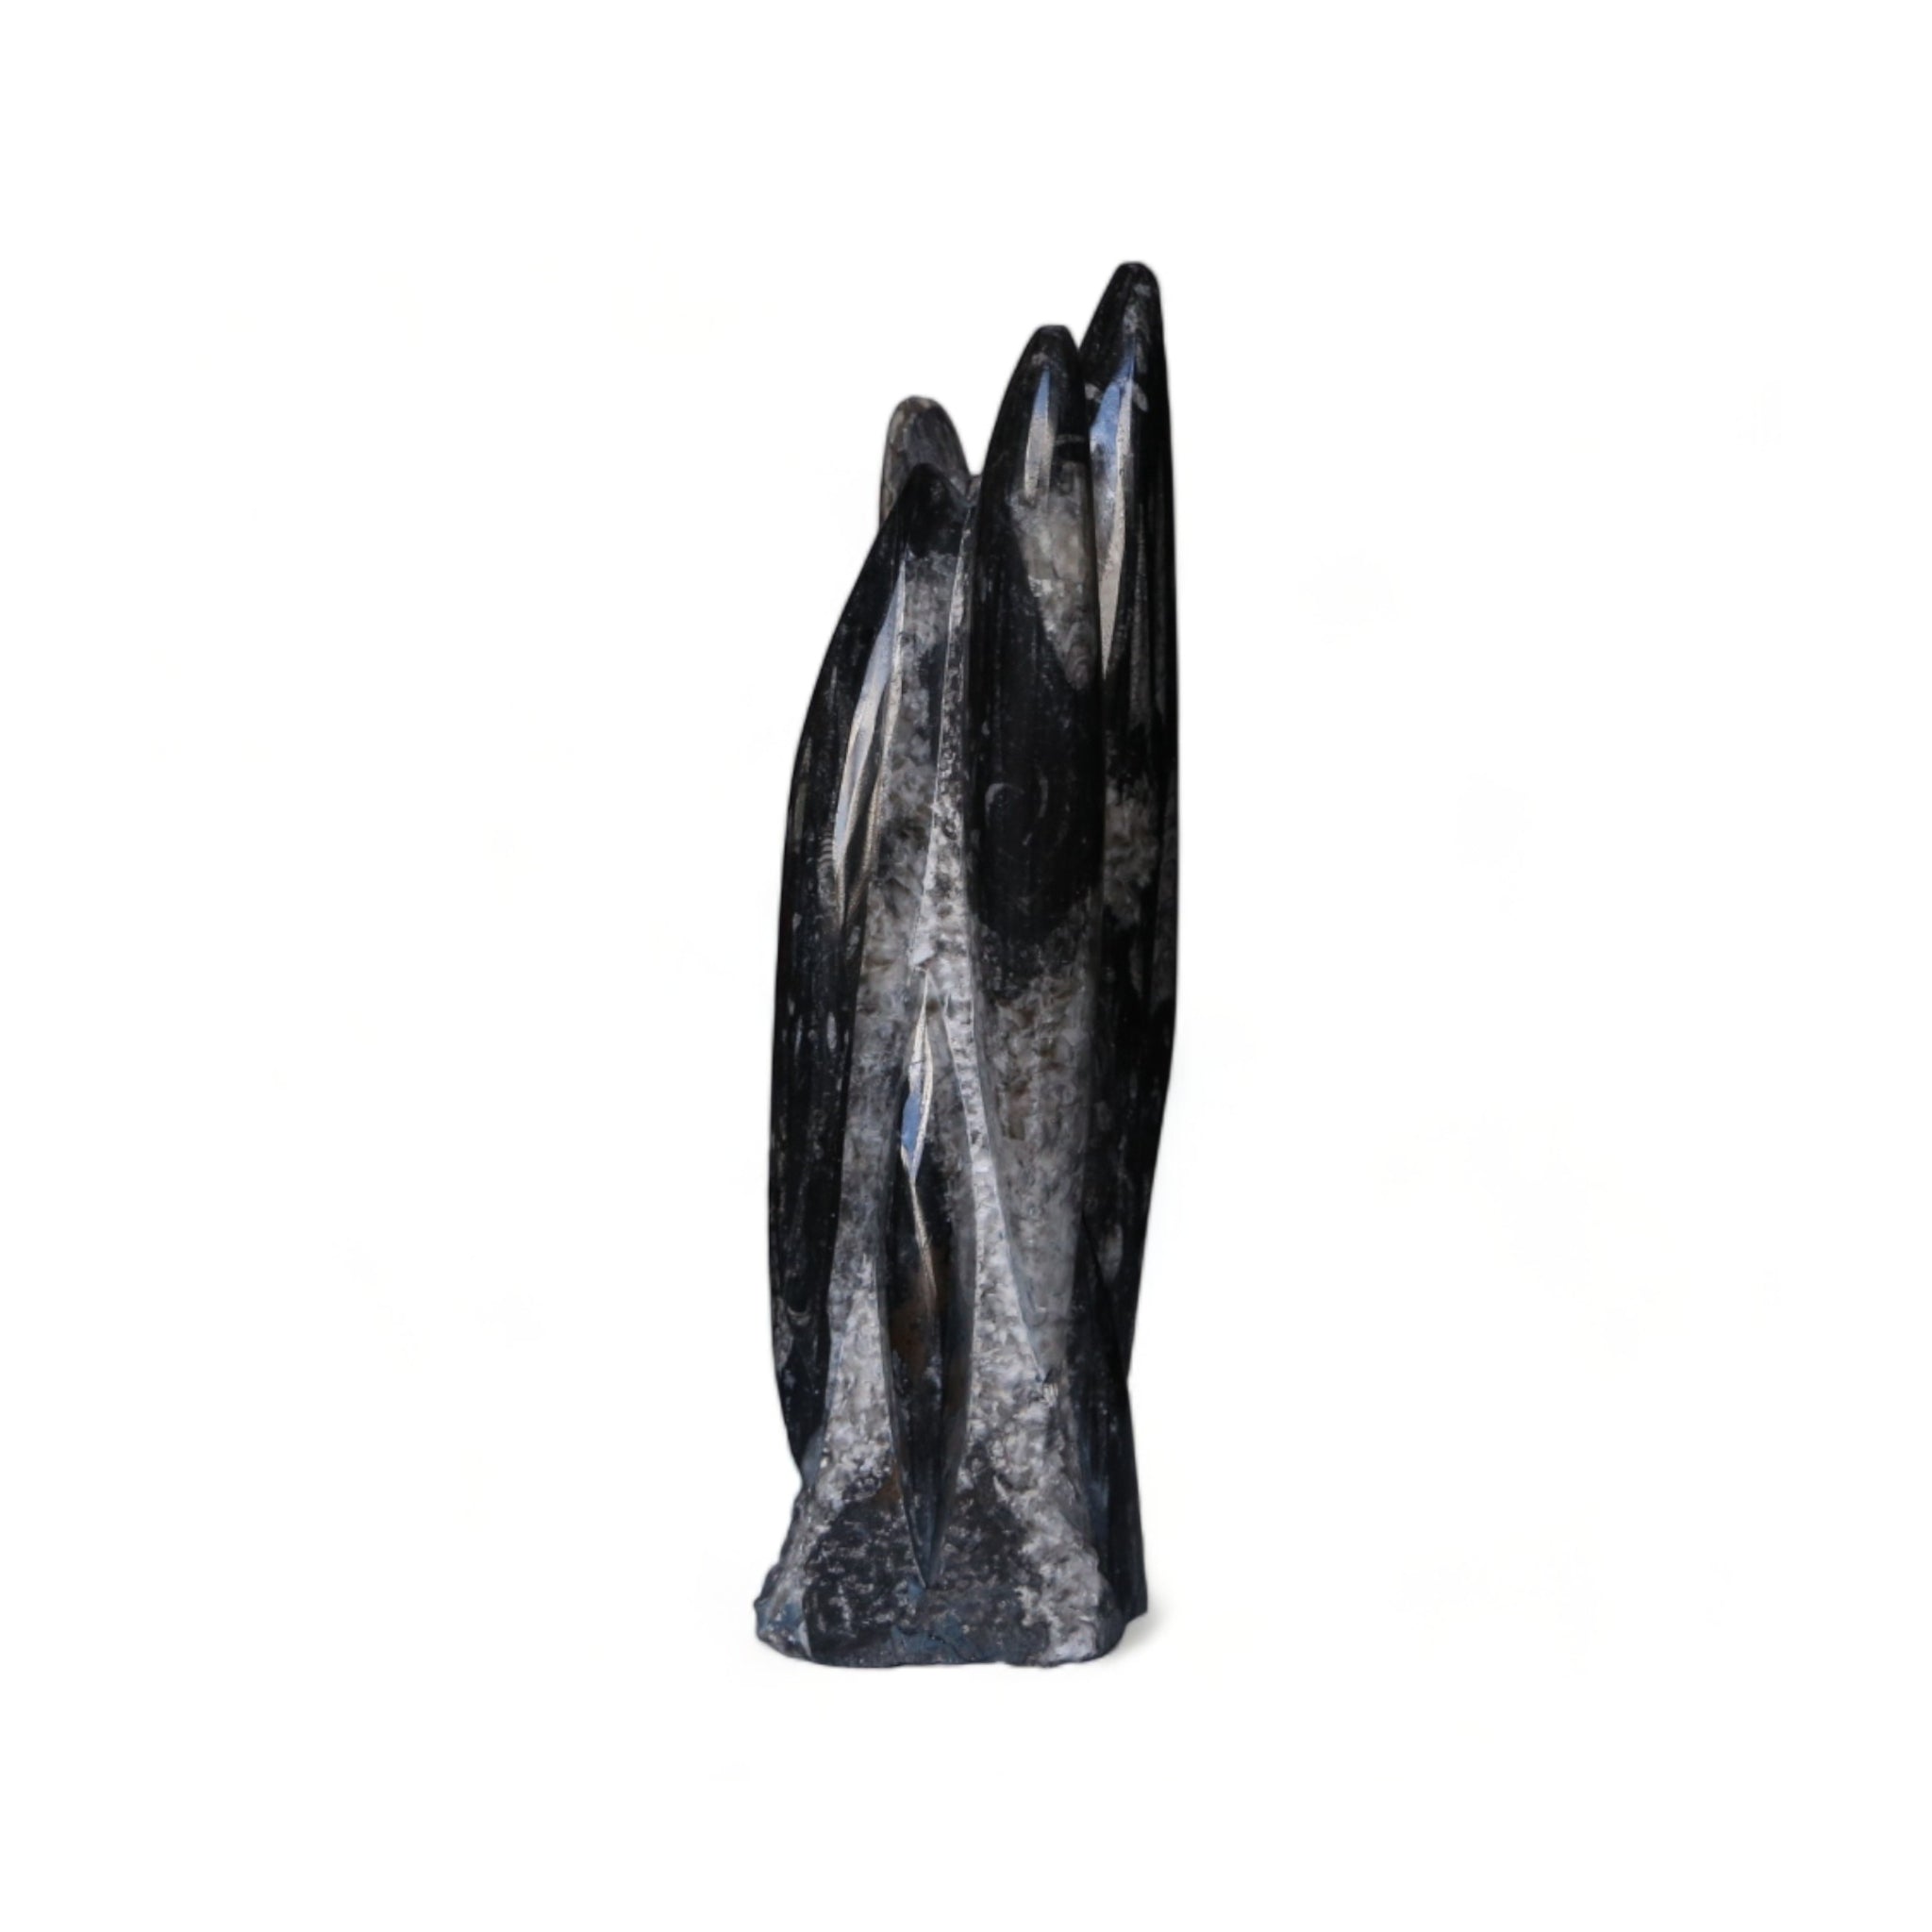 Orthoceras Fossil Tower Sculpture - Majestic 35cm Rustic Elegance for Home Décor